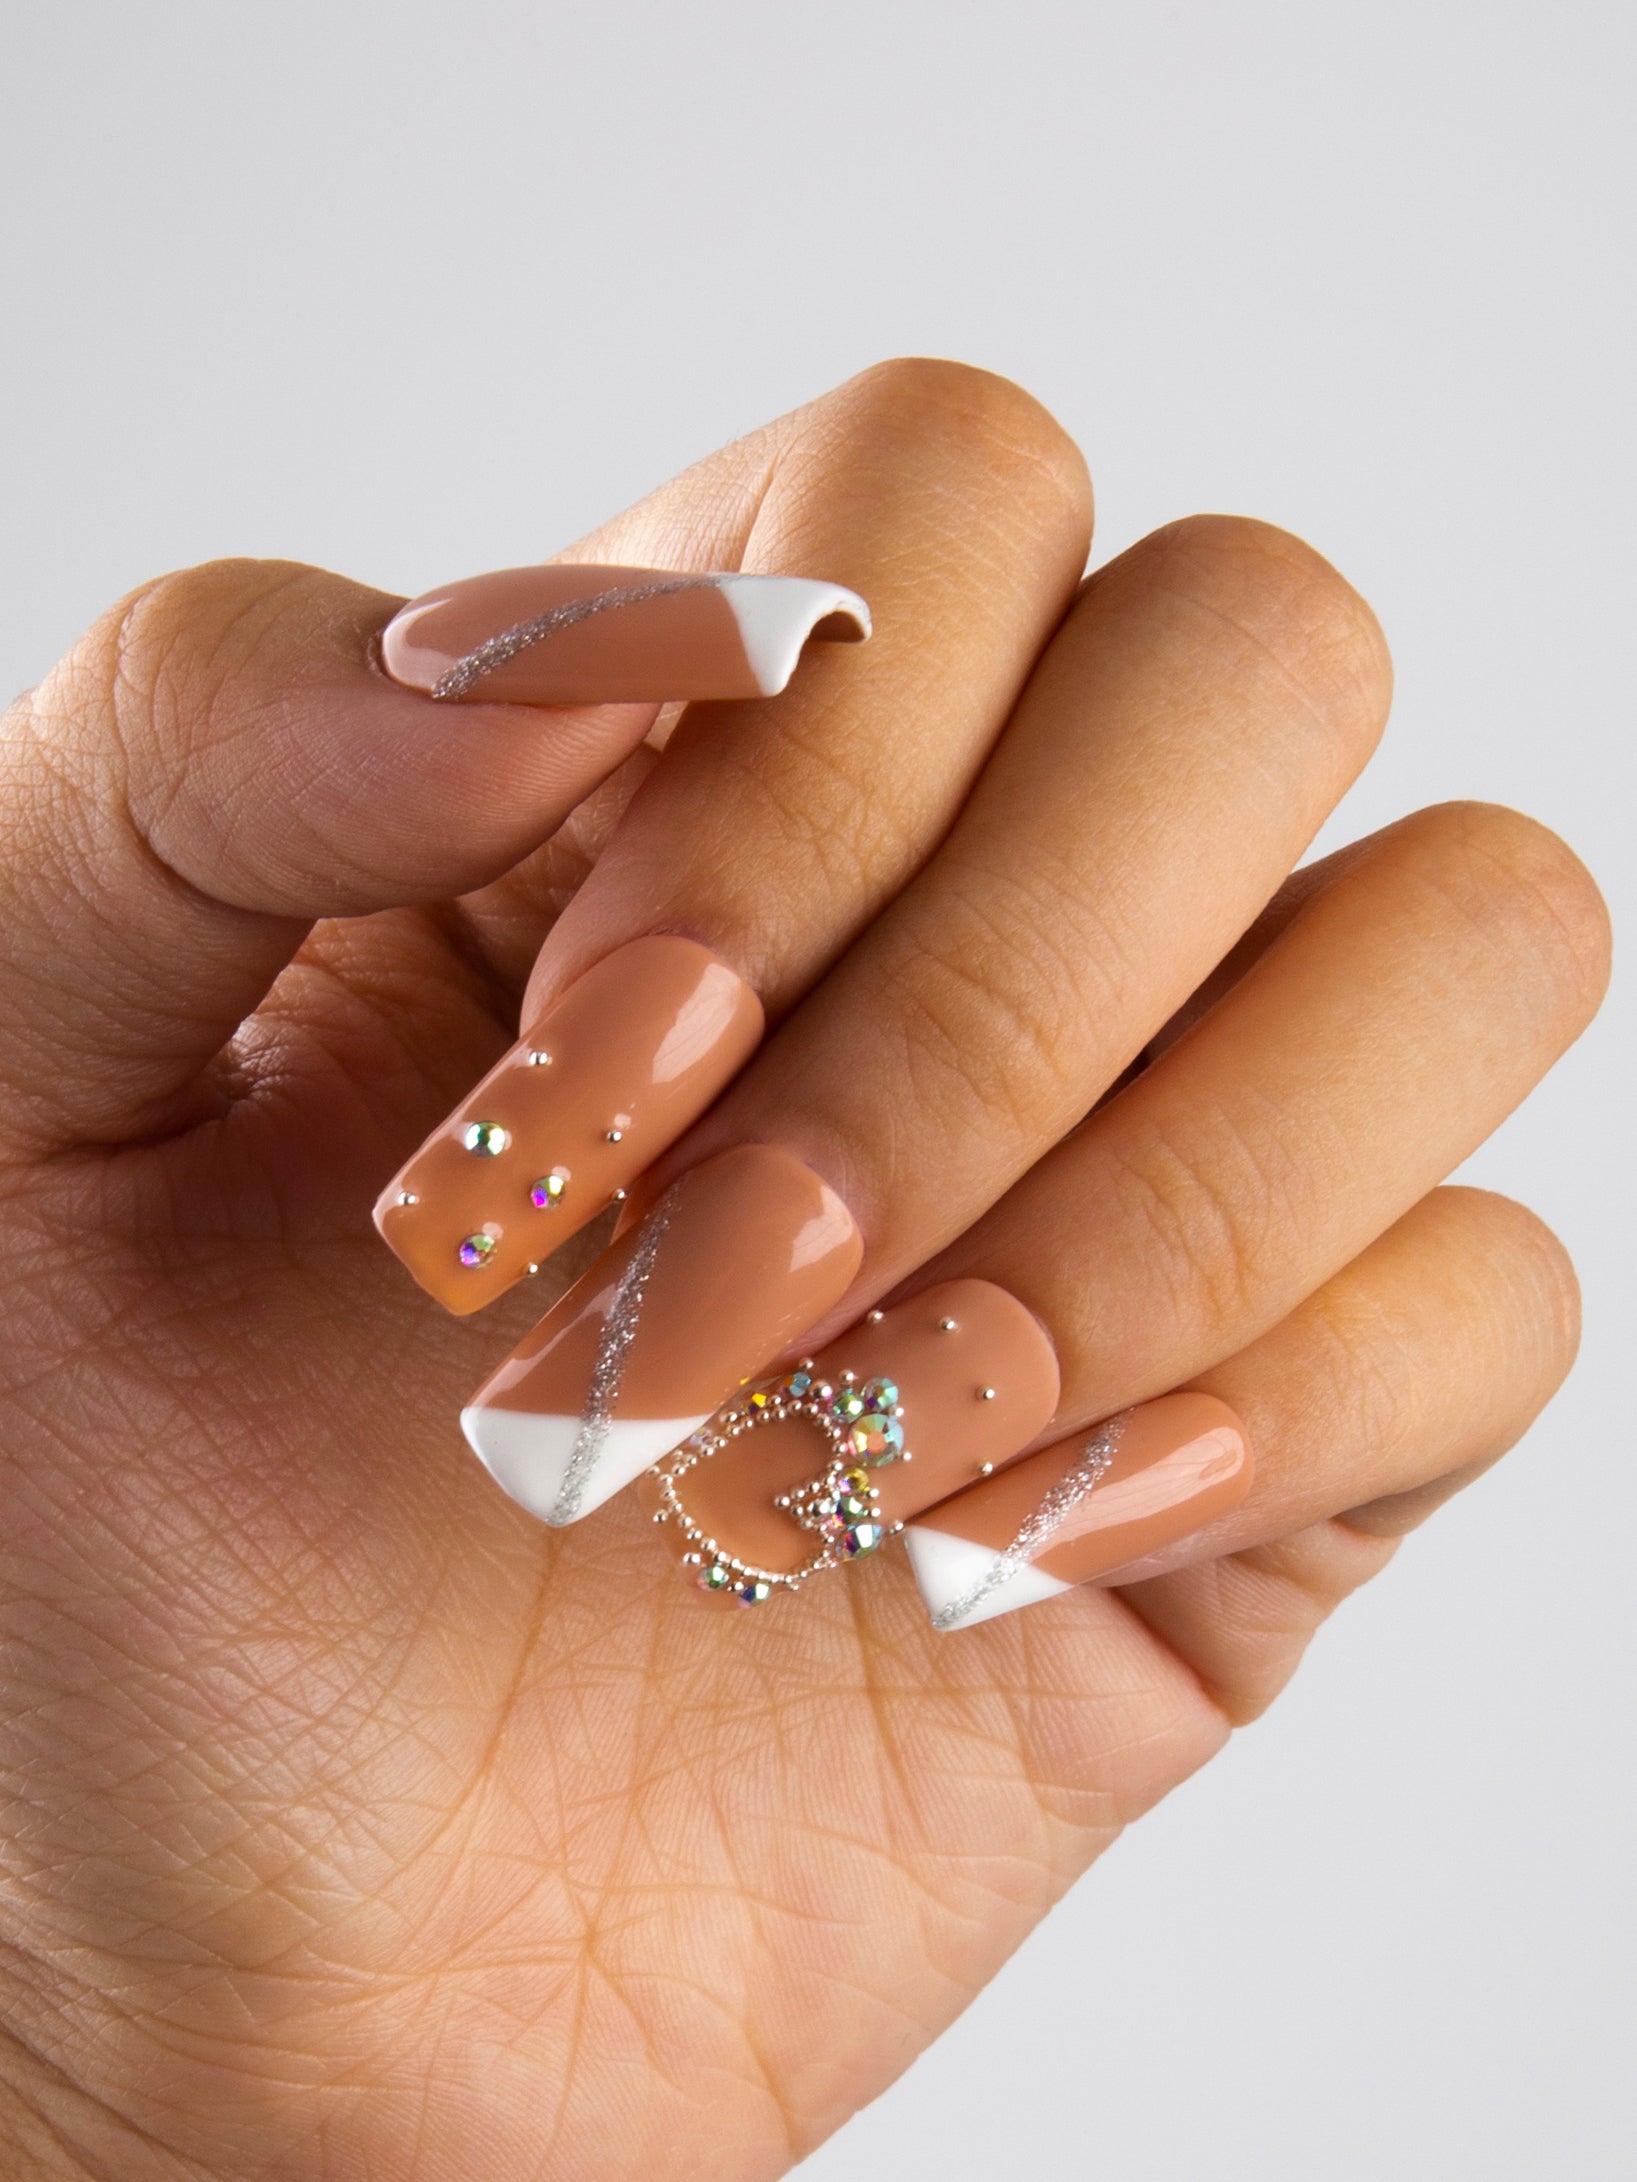 Hand with 'Lovely Kitten Heels' press-on nails set, featuring nude base, white French tips, silver glitter accents, and rhinestone bow on the middle nail.